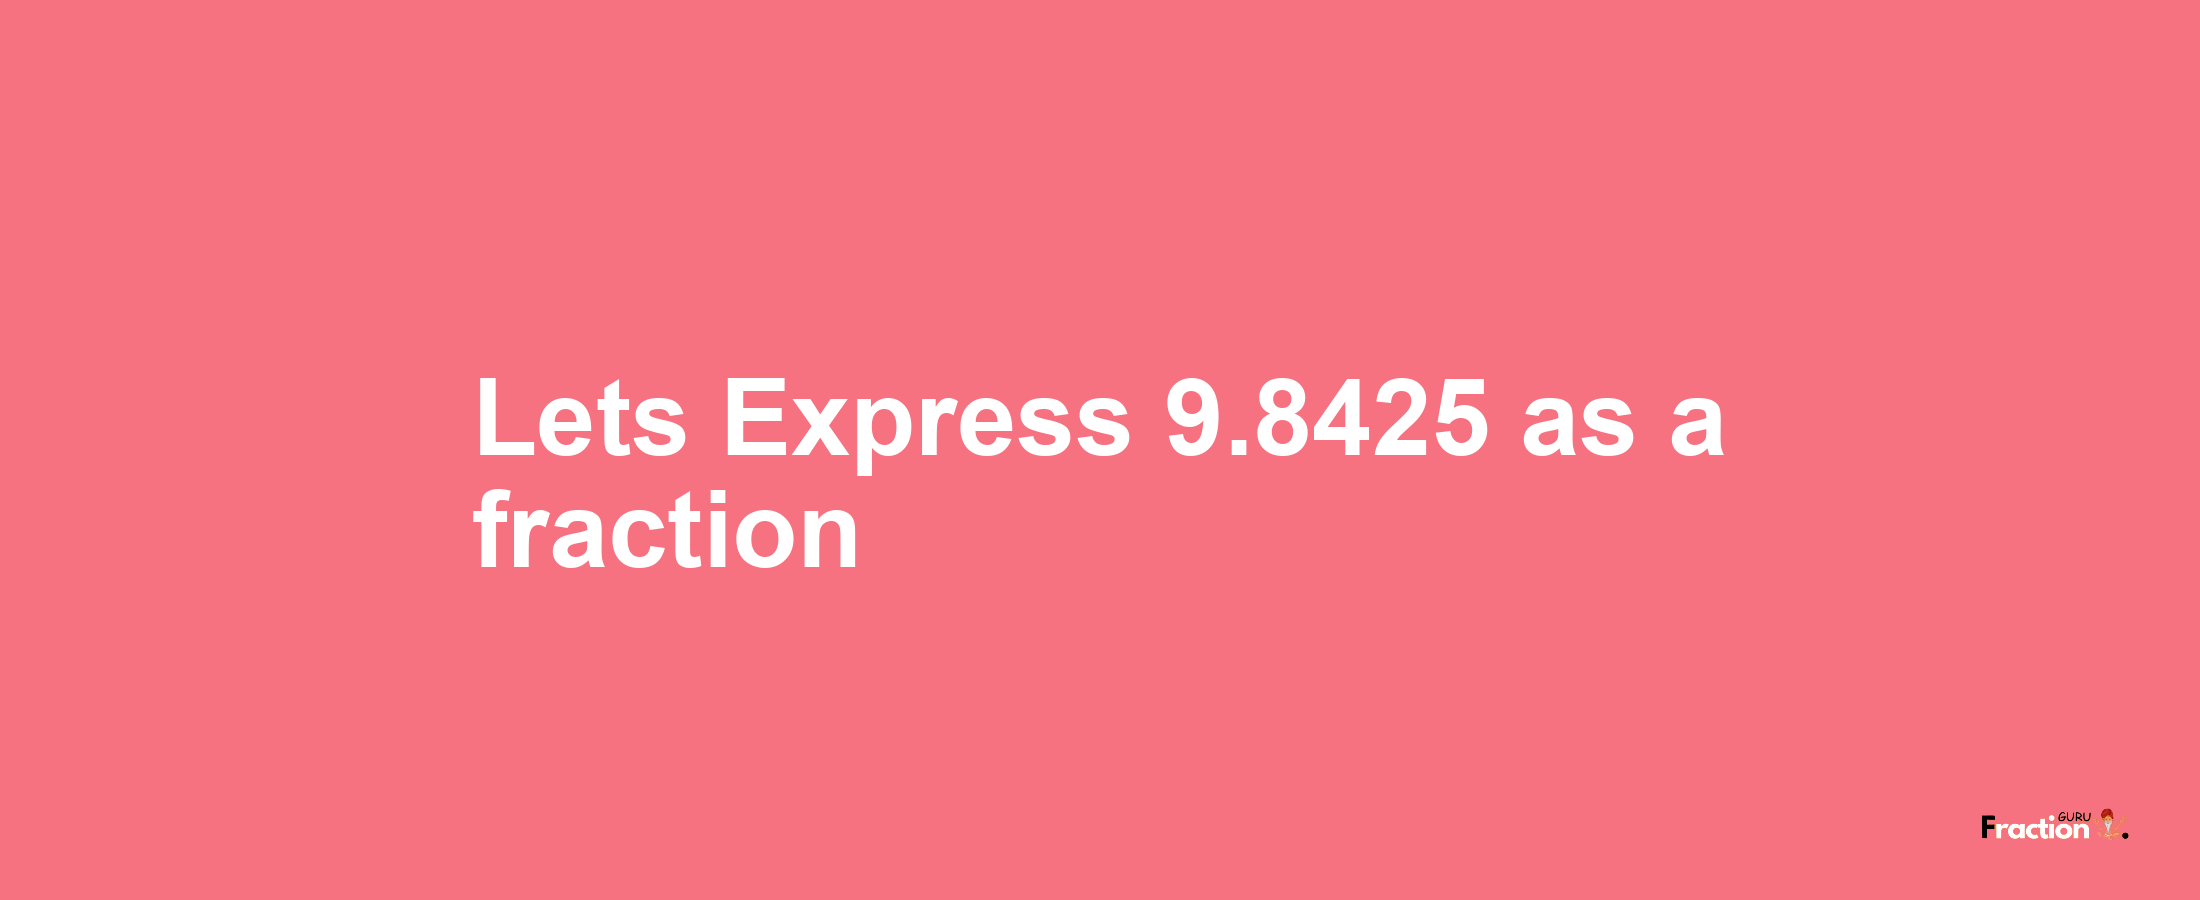 Lets Express 9.8425 as afraction